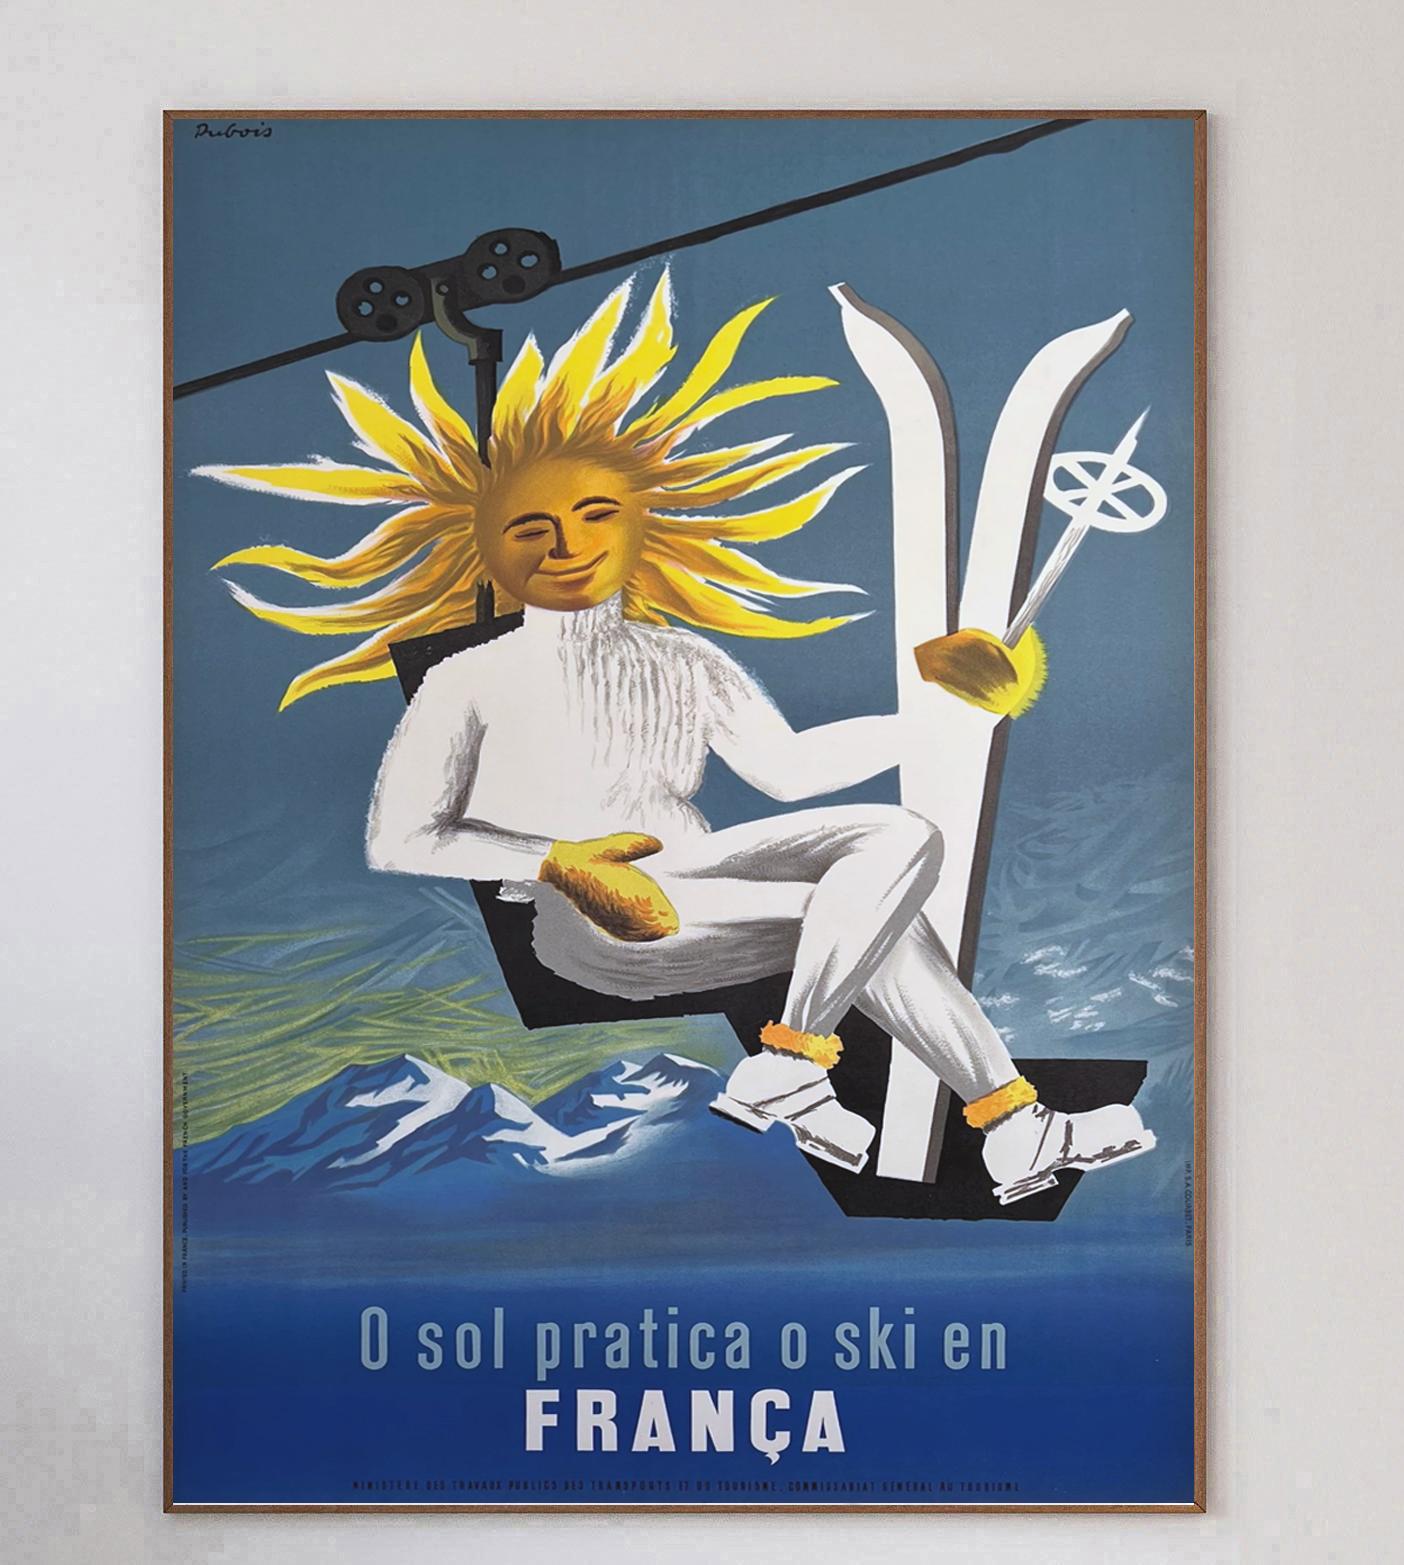 A wonderful treasure of mid-century advertising, displaying the Alps, this beautiful original tourism poster was created by the Ministere Des Travaux Publics Des Transports Et Du Tourisme, or French Tourism Minister in 1950 to advertise ski holidays